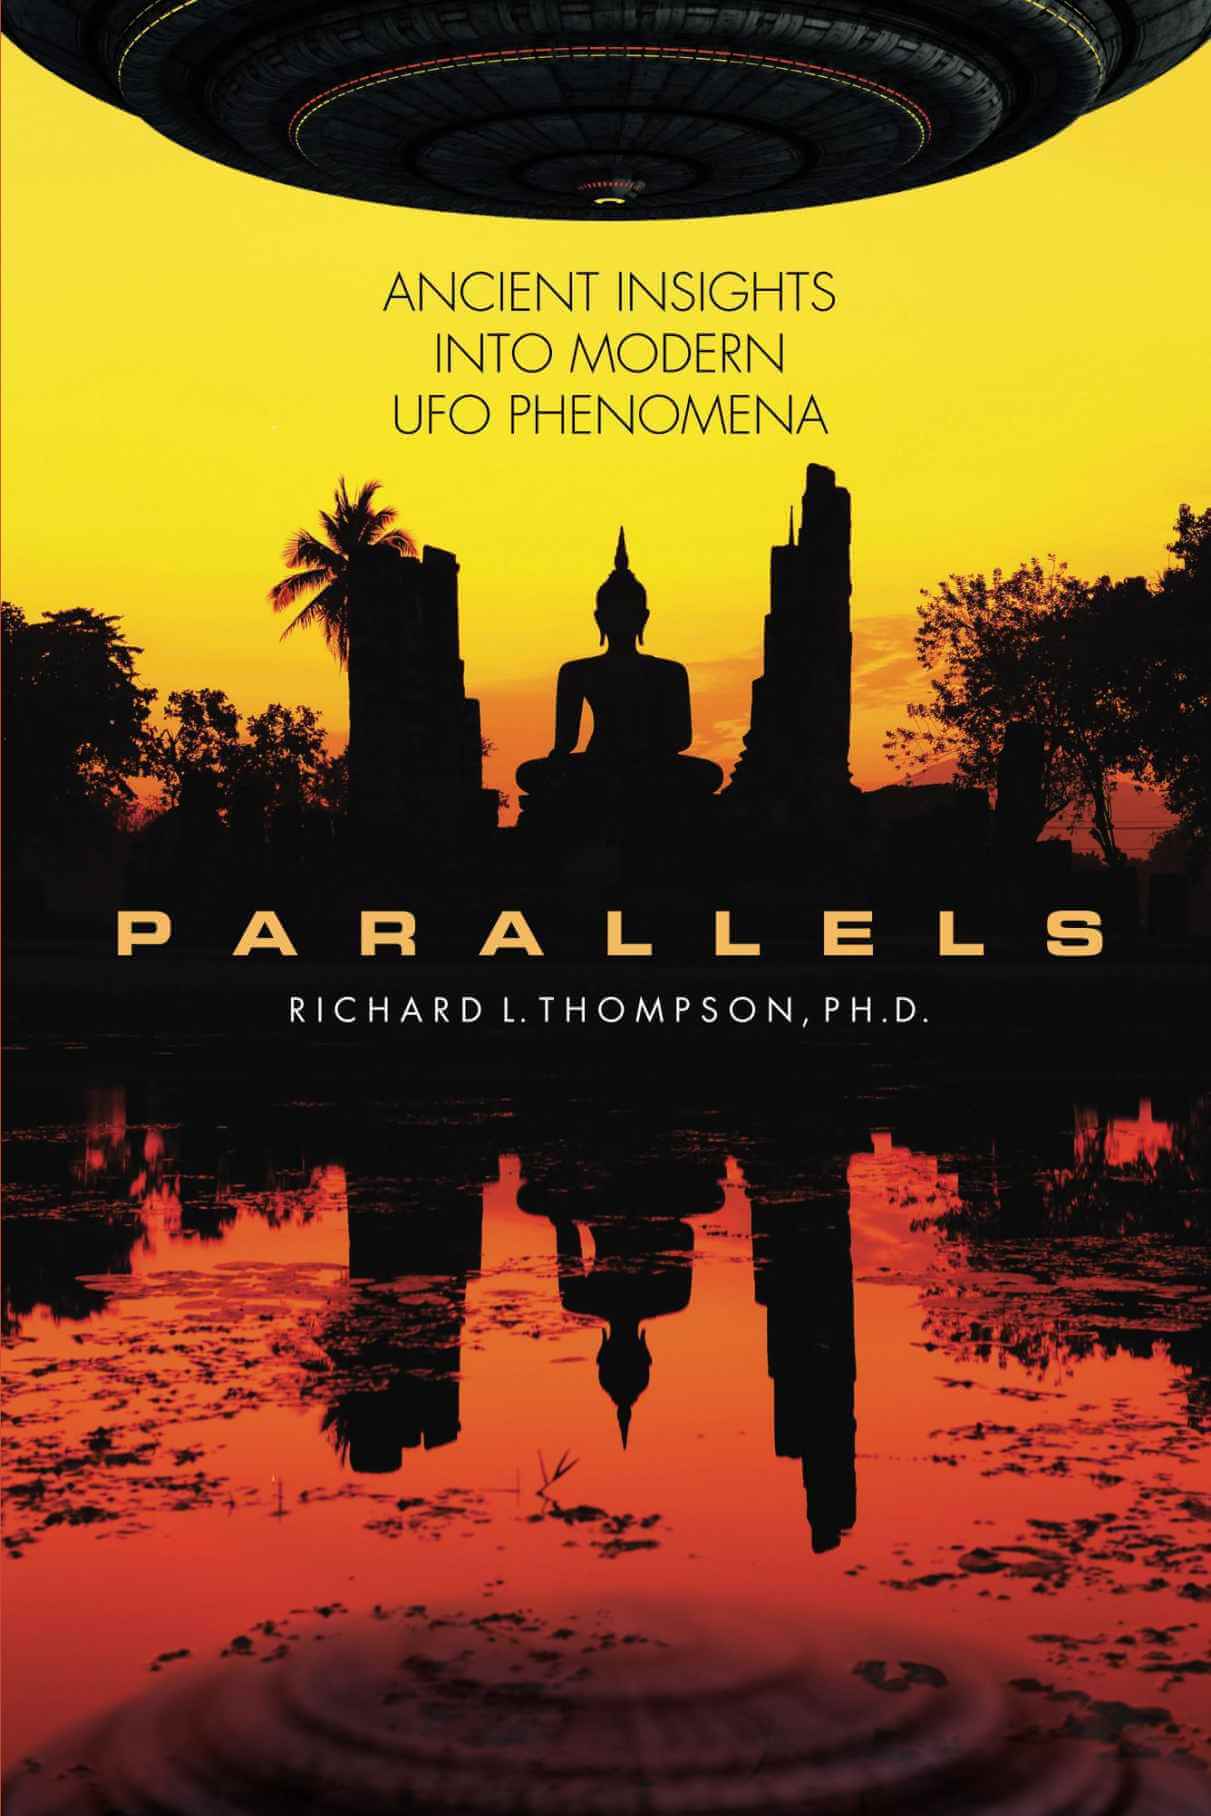 Parallels - Ancient Insights into Modern UFO Phnomena